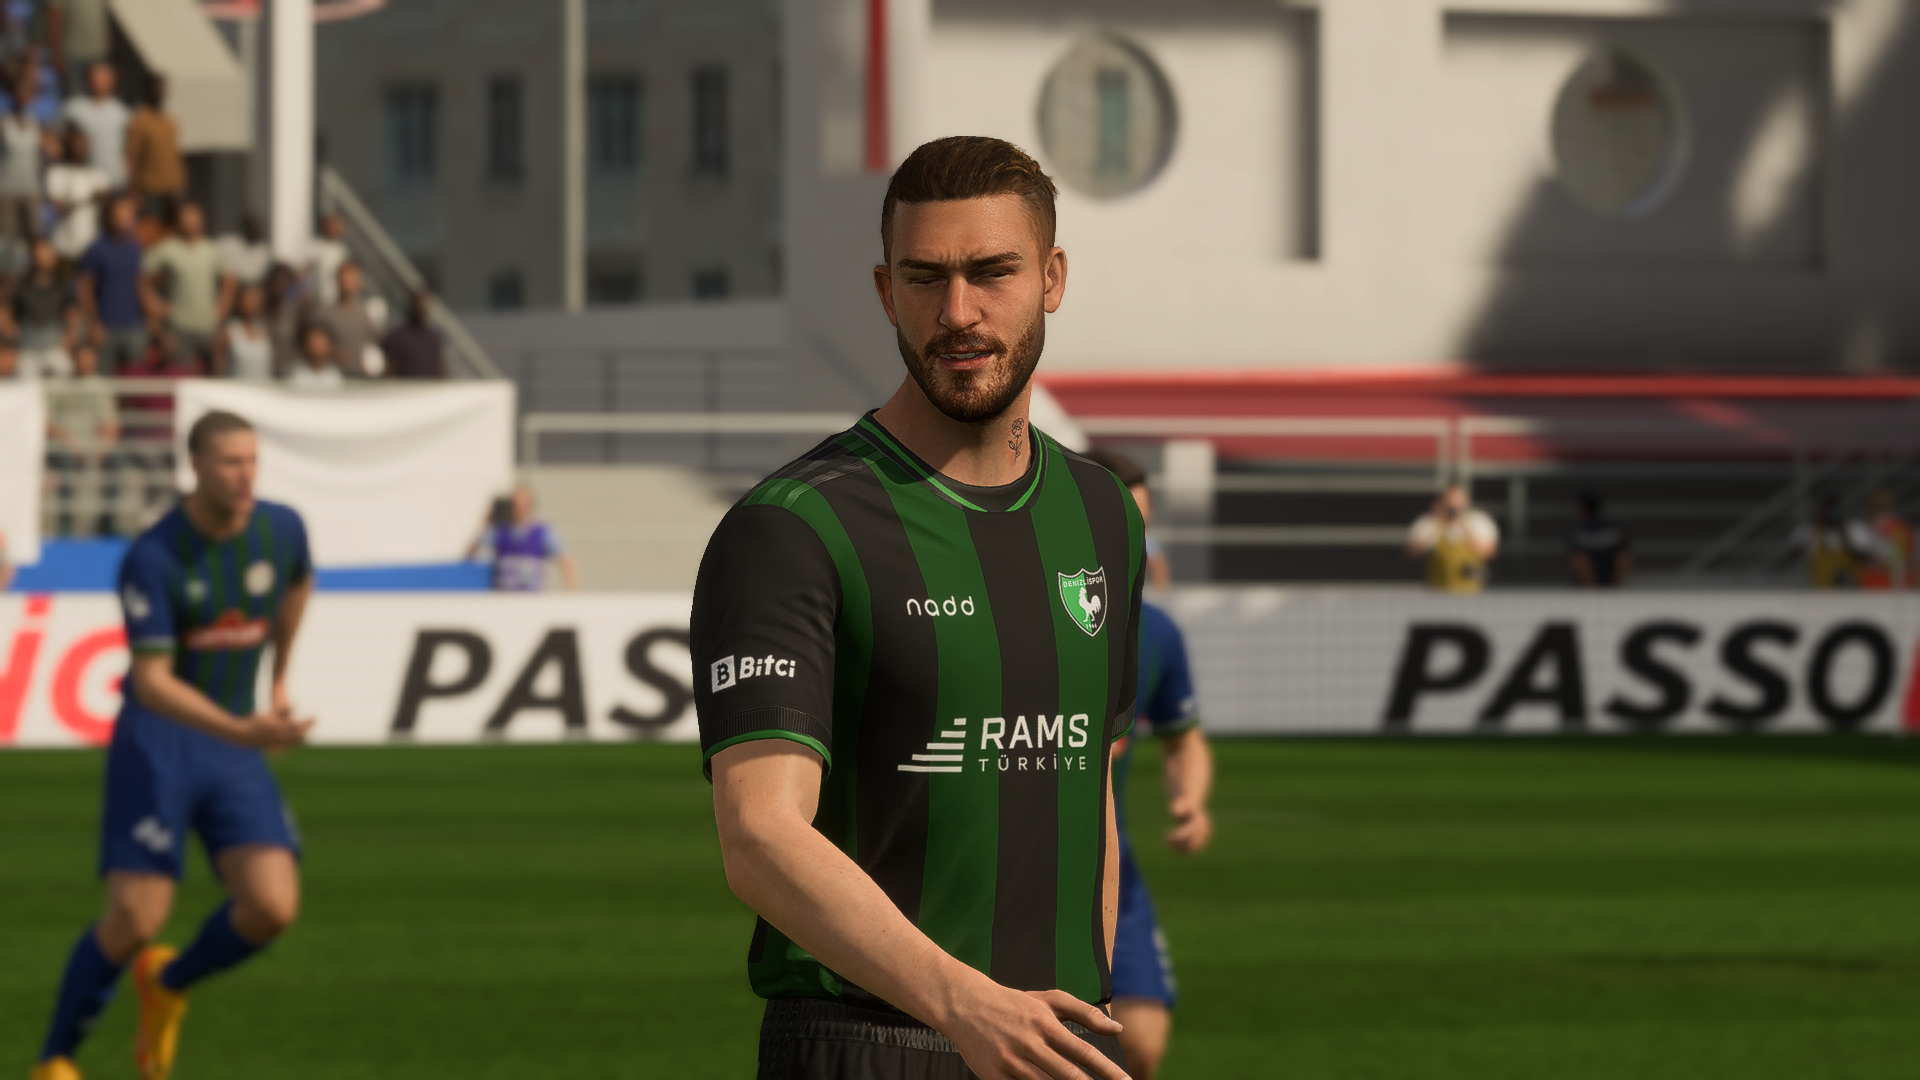 PATCH FIFEX - FIFA 23